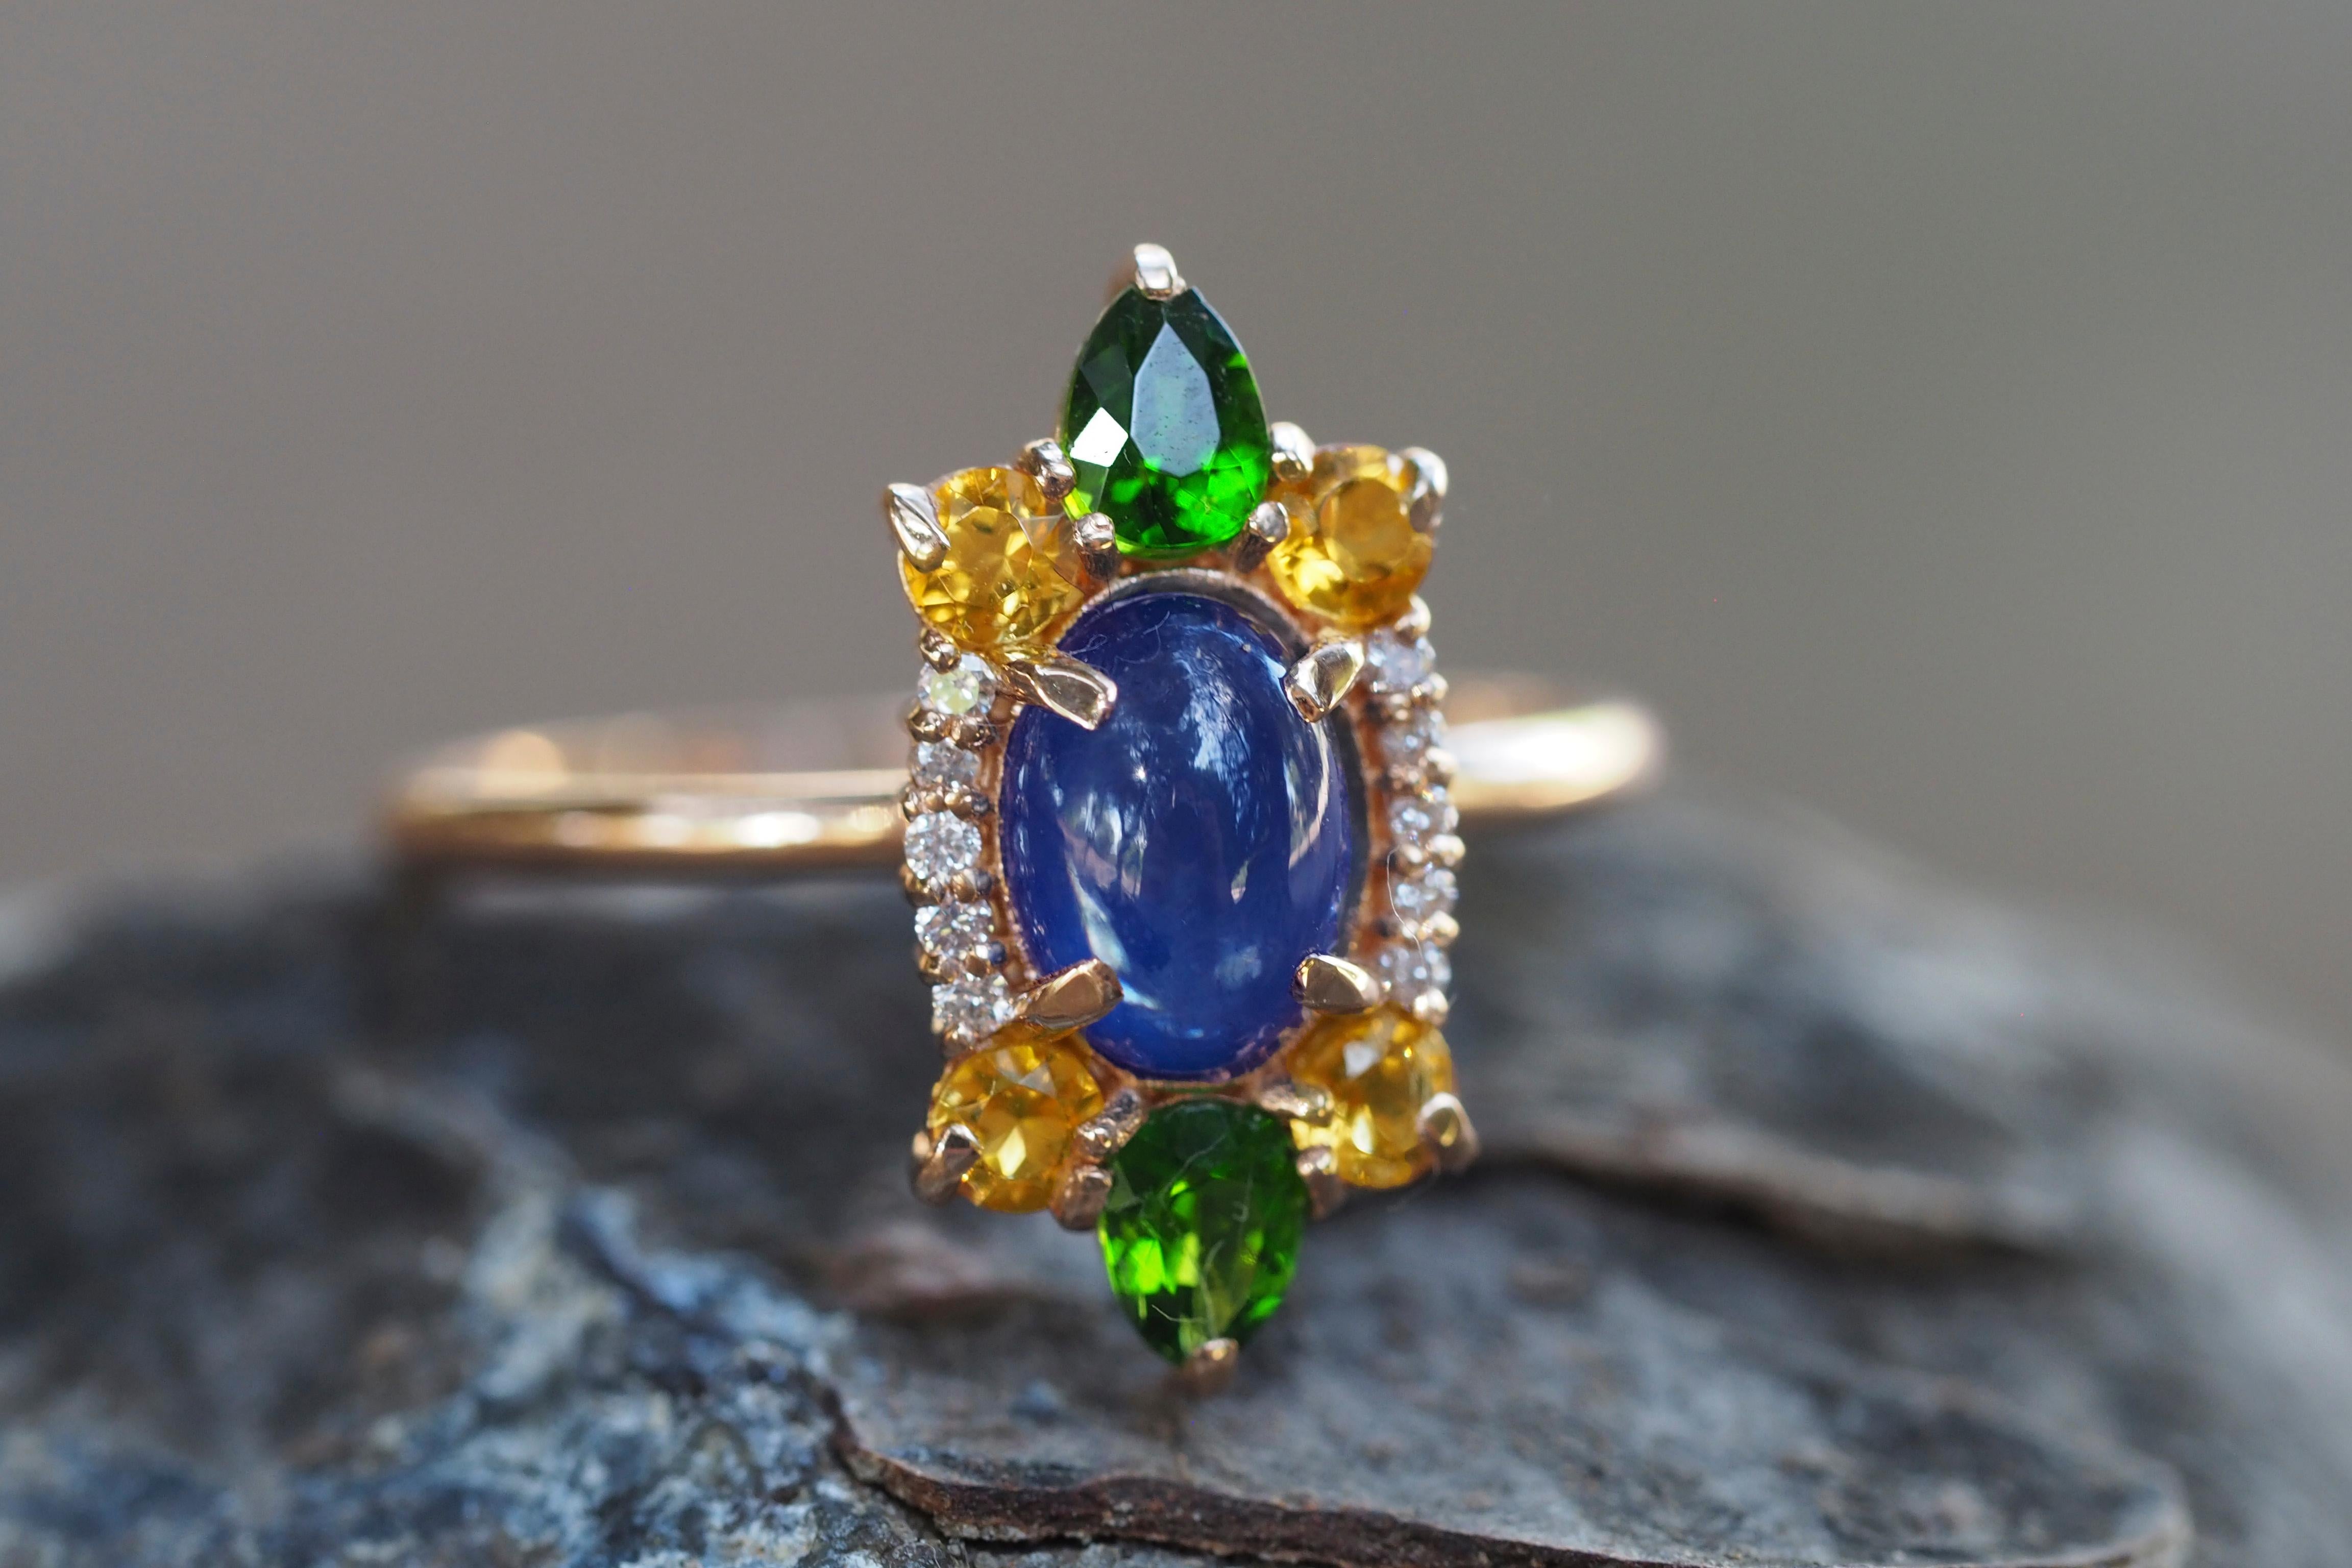 14k Gold ring with cabochon Sapphire, Chrome diopsides, Sapphires, Diamonds. 
Colorful ring. Rainbow ring. Multi Color Natural Gemstone Ring.

Metal: 14k gold
Weight: 2.5 g. depends from size.

Central gemstone: sapphire
Color - blue
Oval cabochon